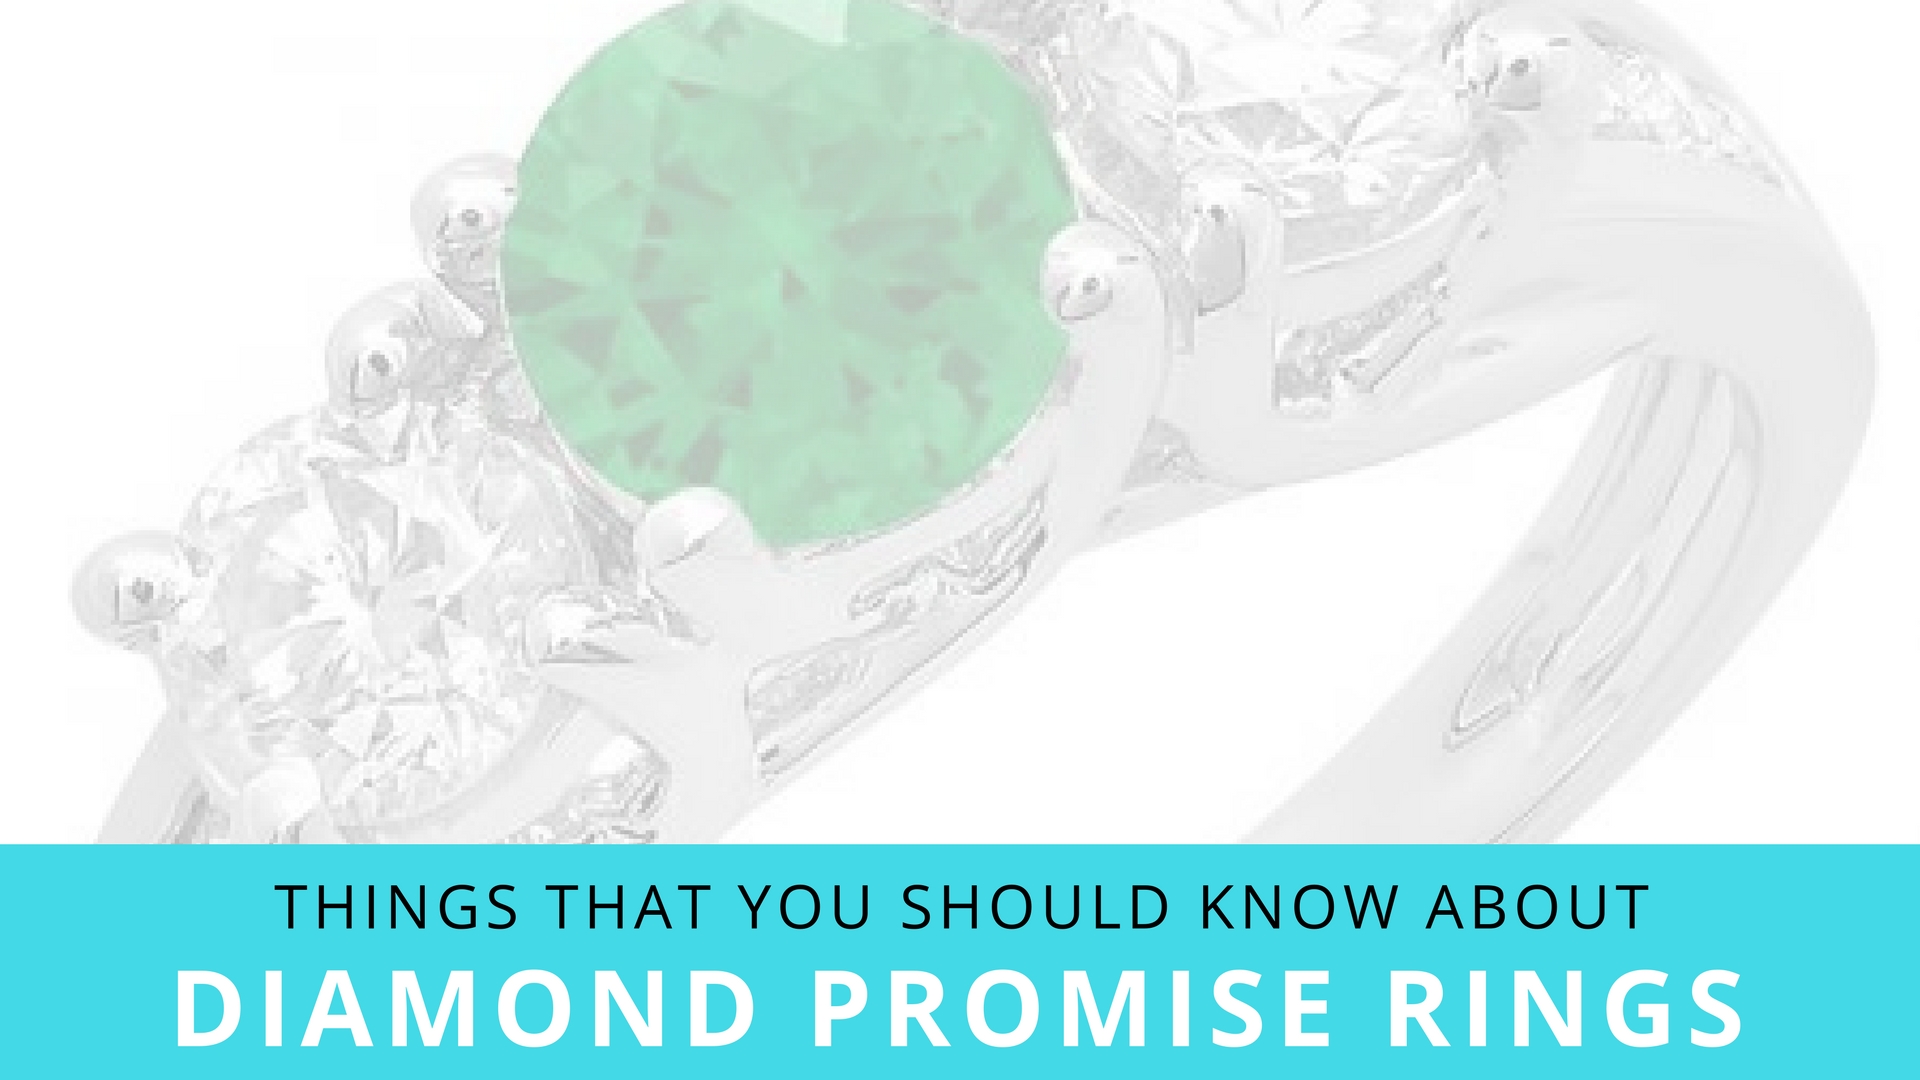 Things that you Should Know about Promise Rings - dazzling rock